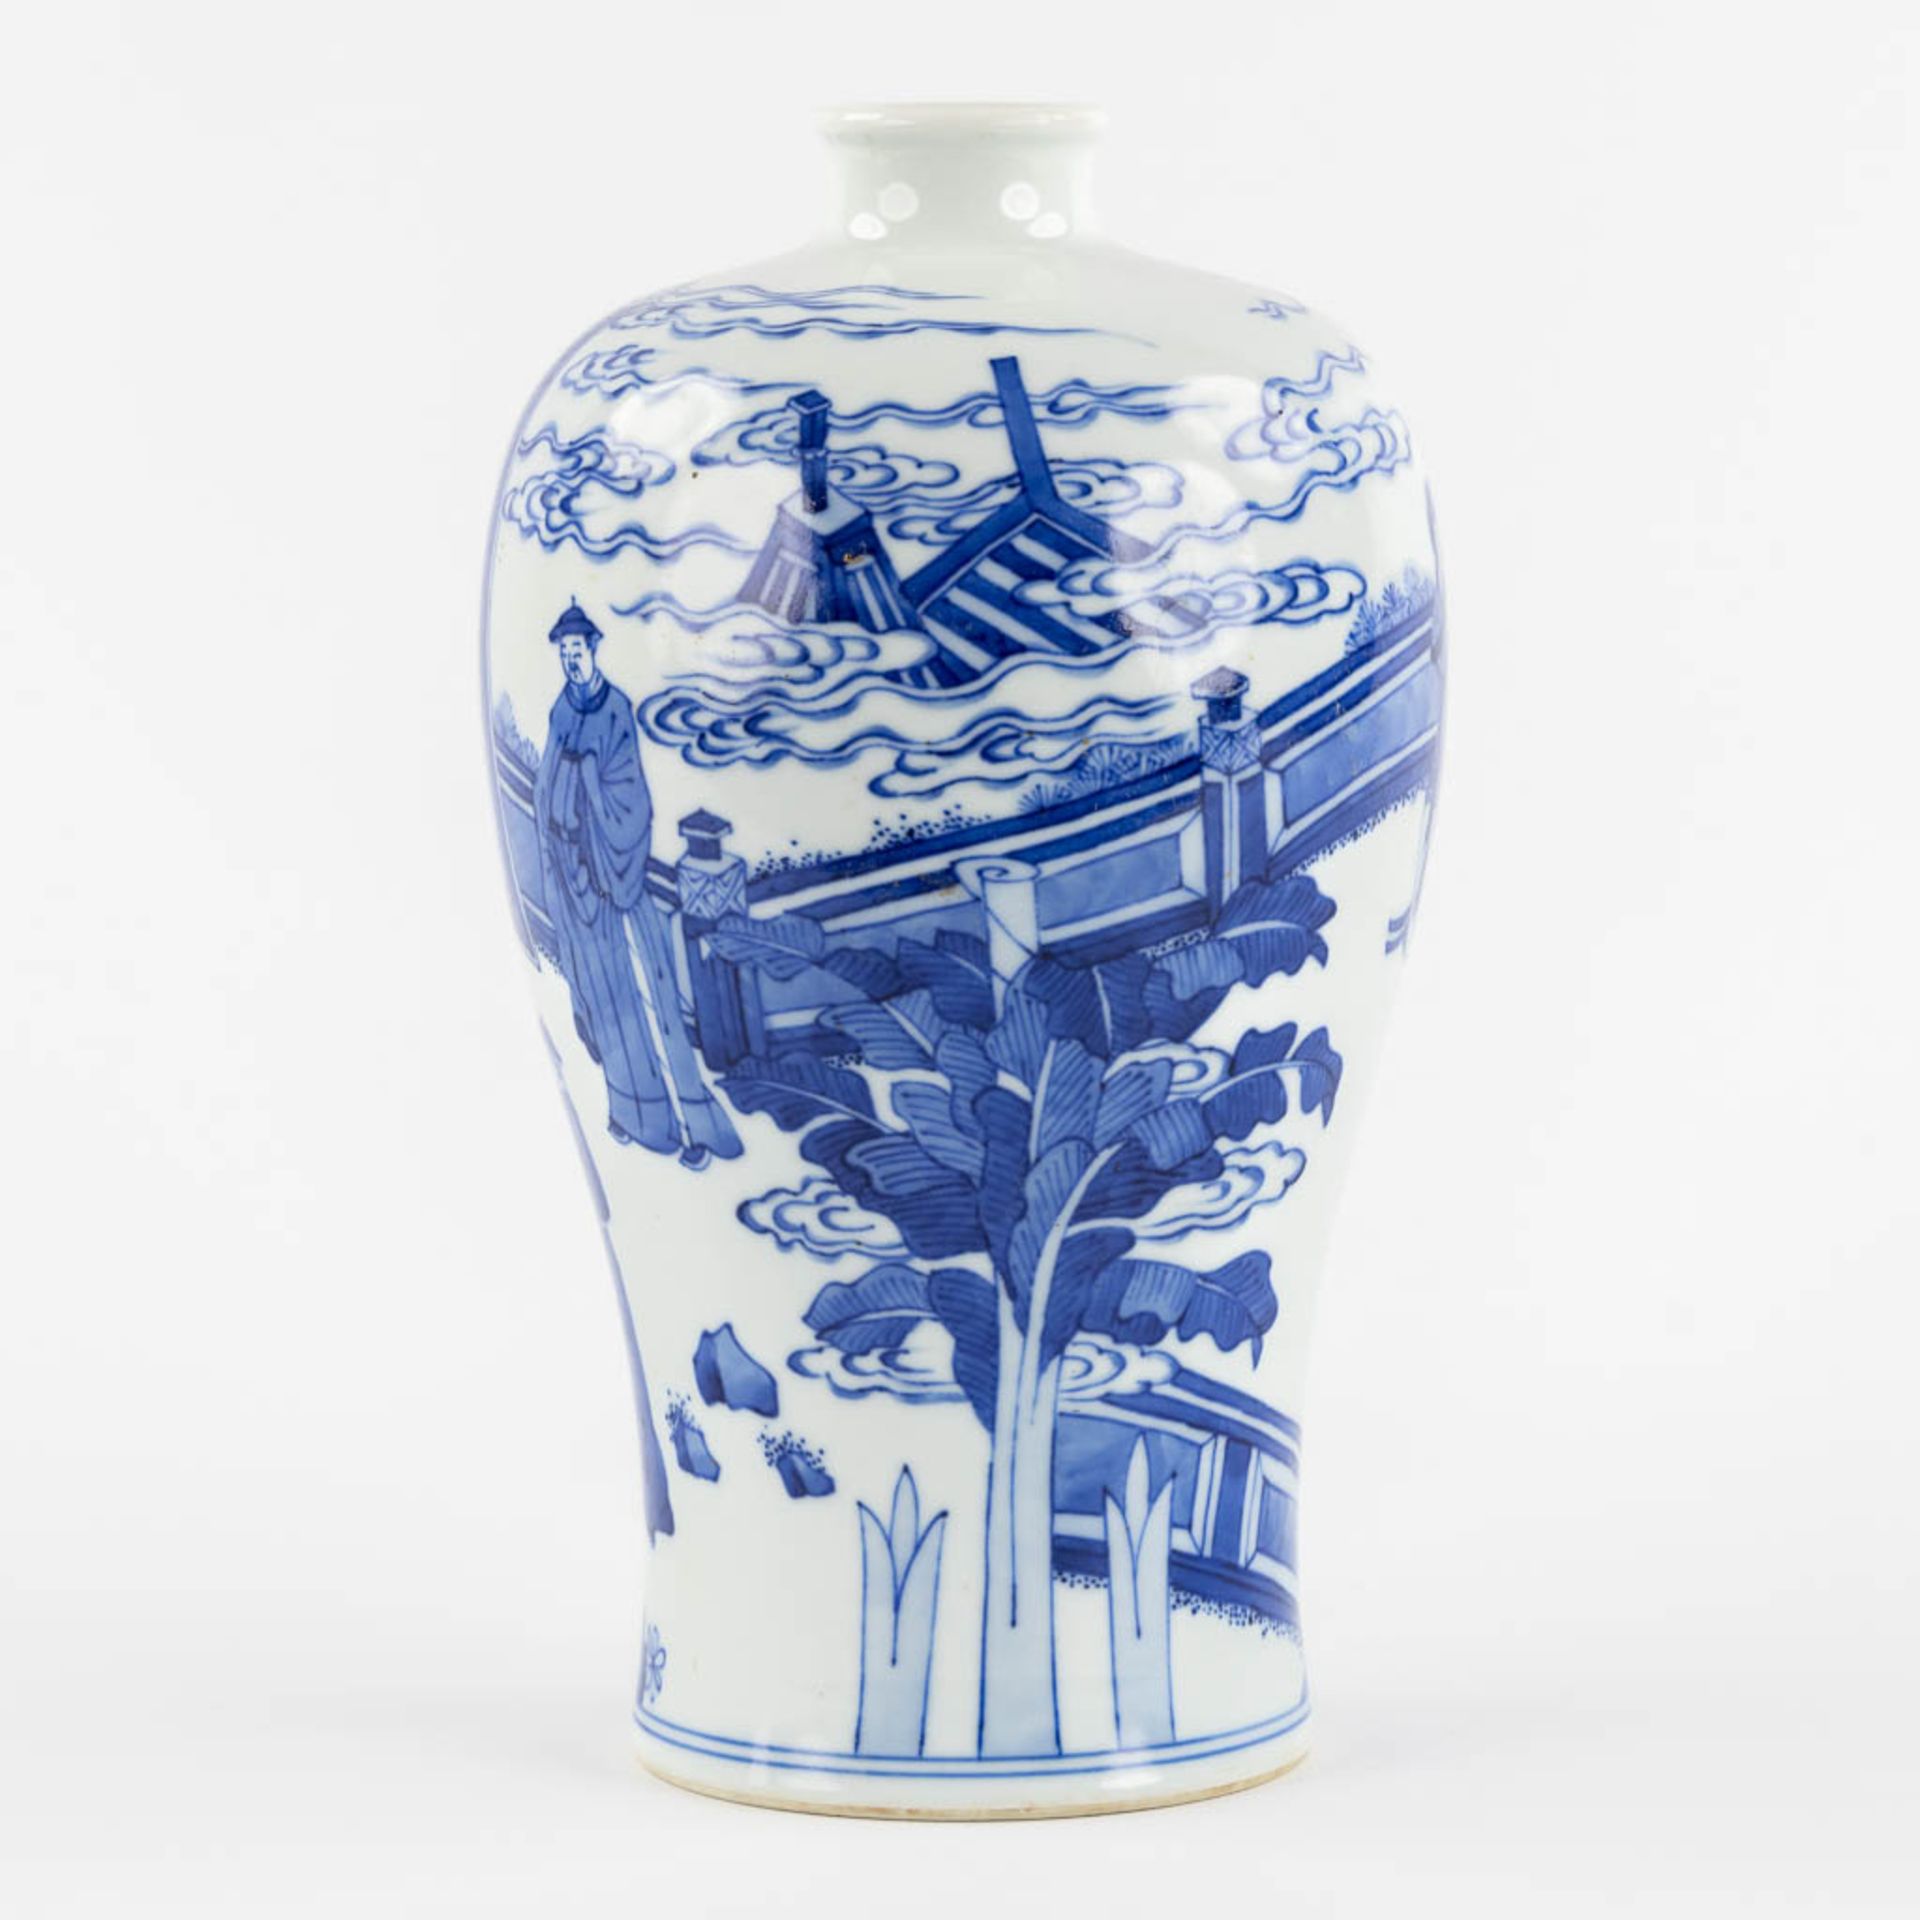 A Chinese 'Meiping' vase, blue-white decor. 20th C. (H:25 x D:15 cm) - Image 7 of 14